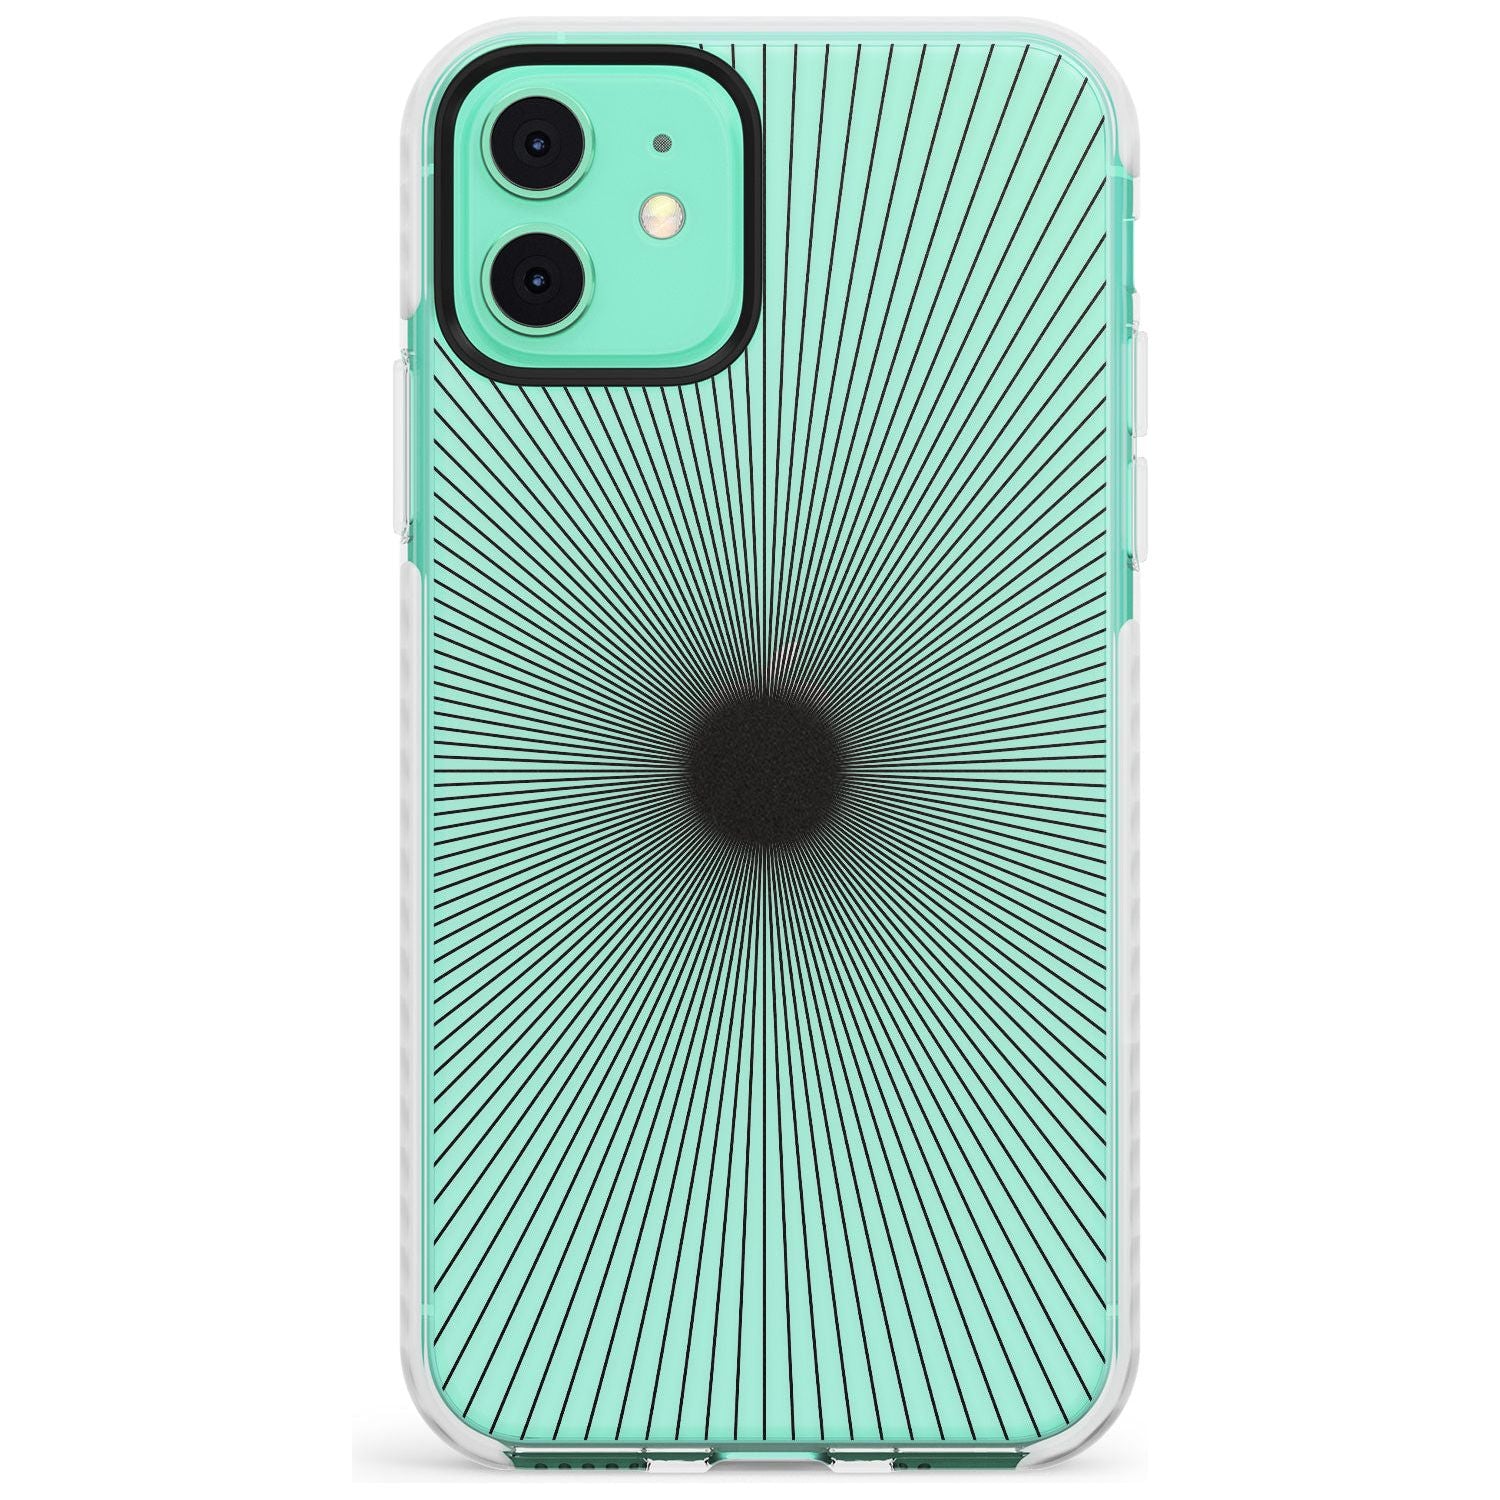 Abstract Lines: Sunburst Slim TPU Phone Case for iPhone 11